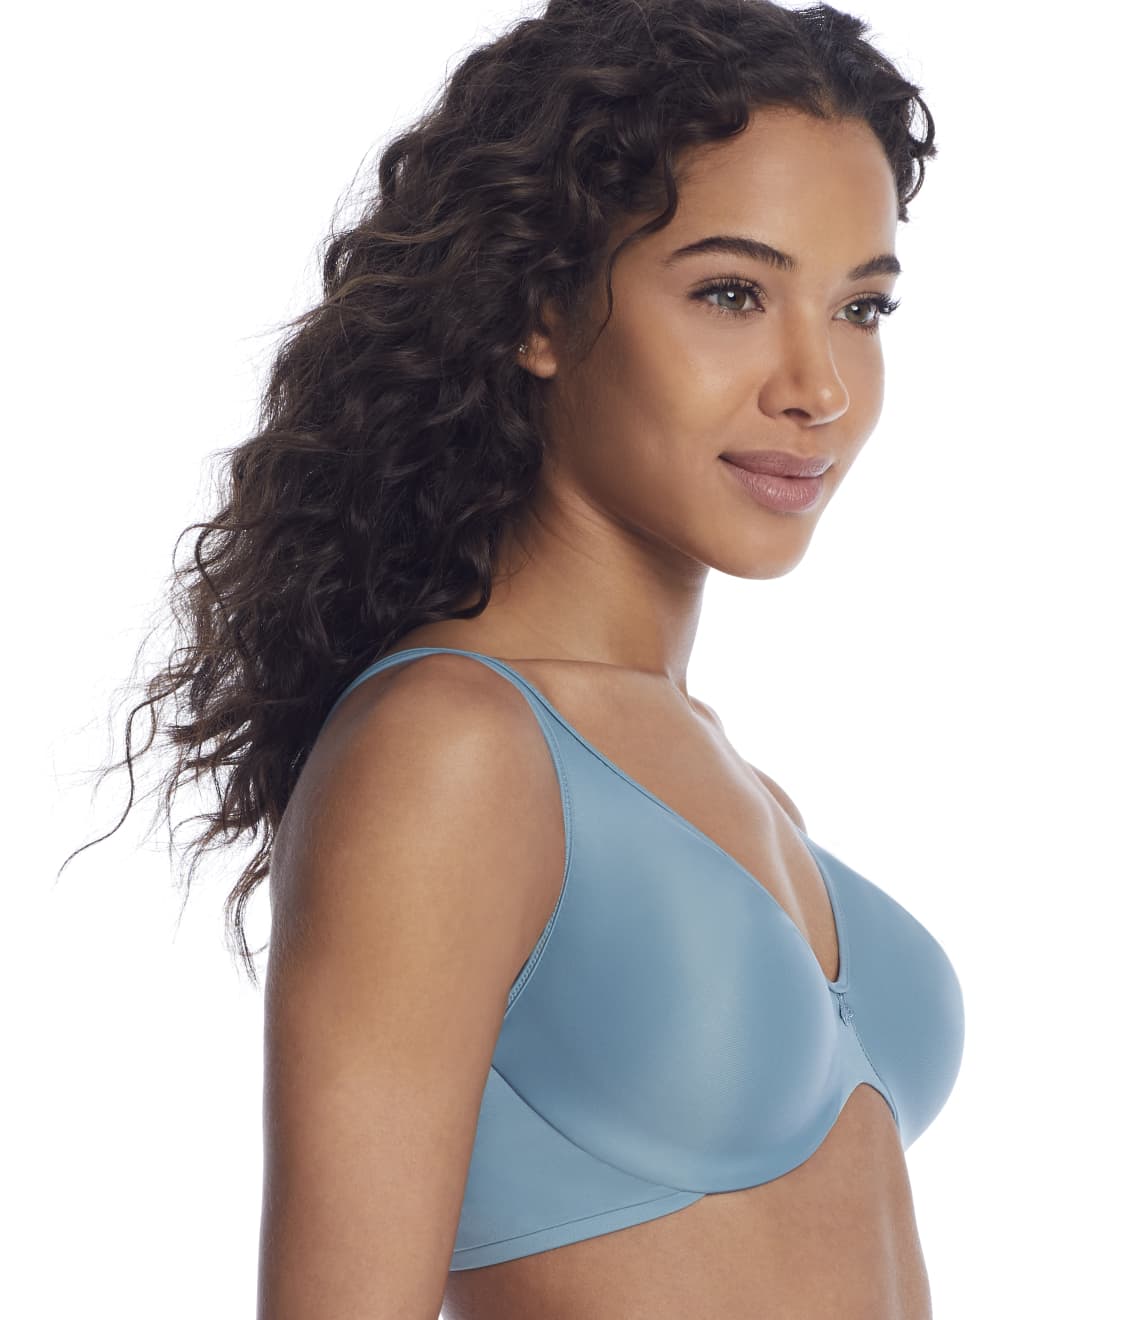 Details about   Bali 3383 Passion for Comfort Underwire Bra